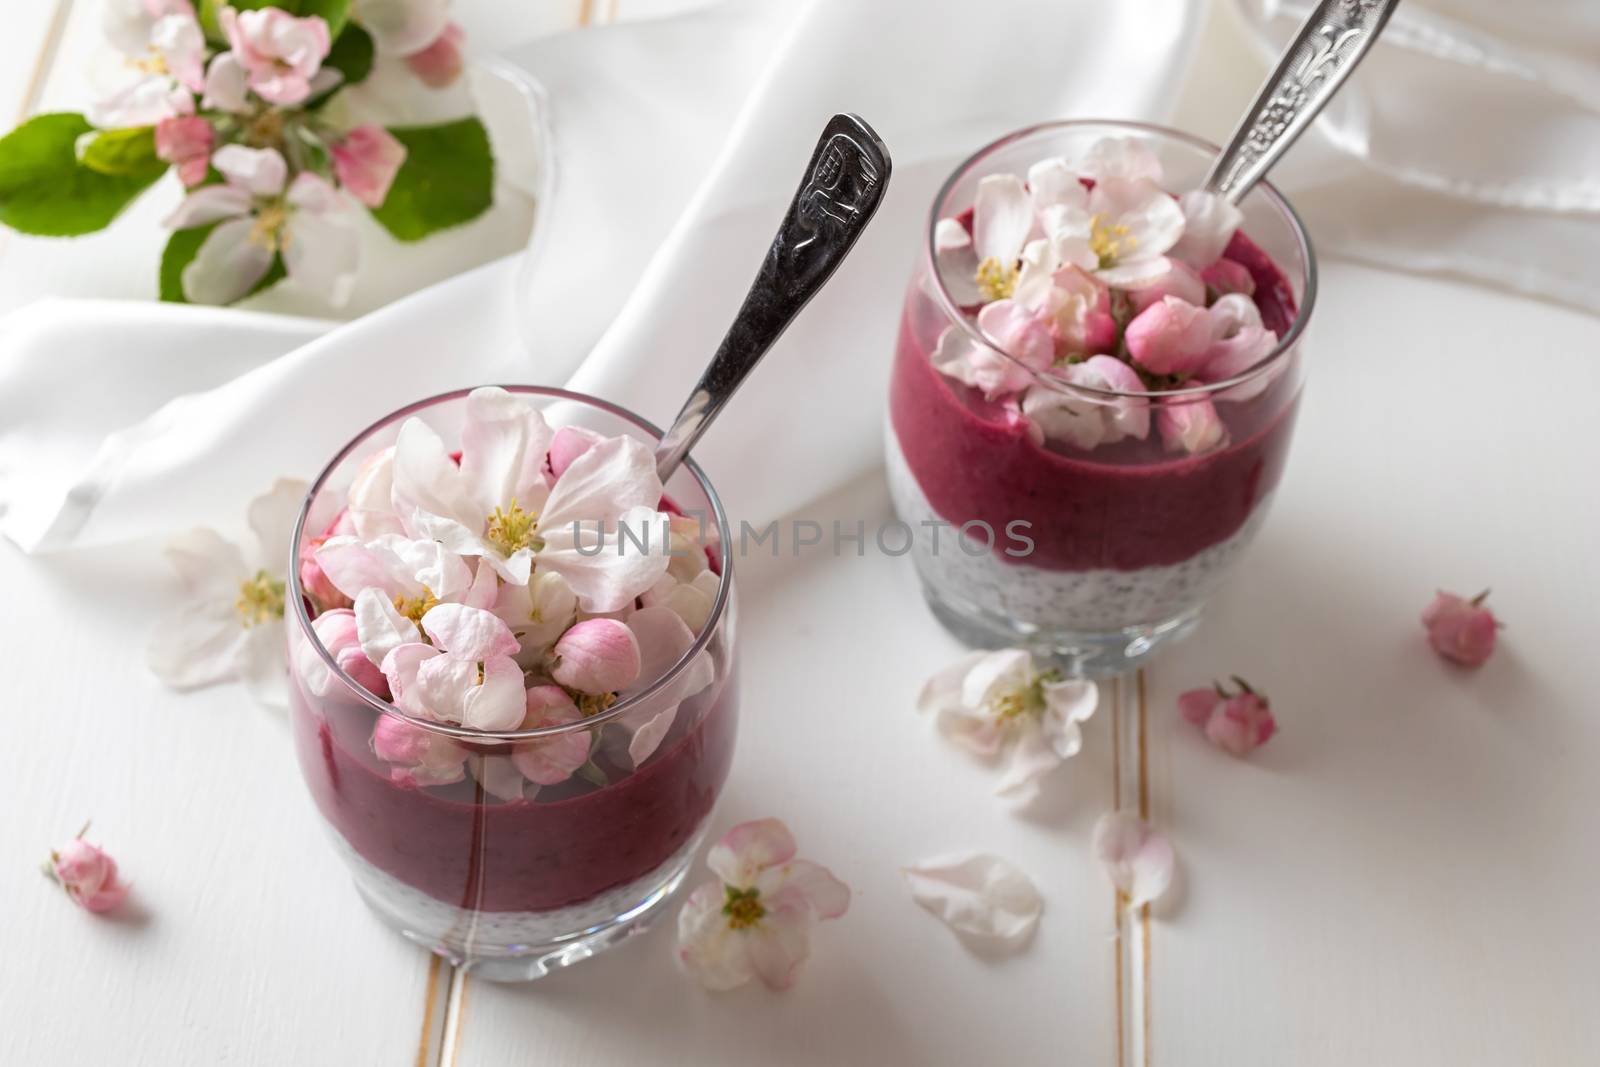 Layered chia pudding with yogurt, blueberries and apple blossoms